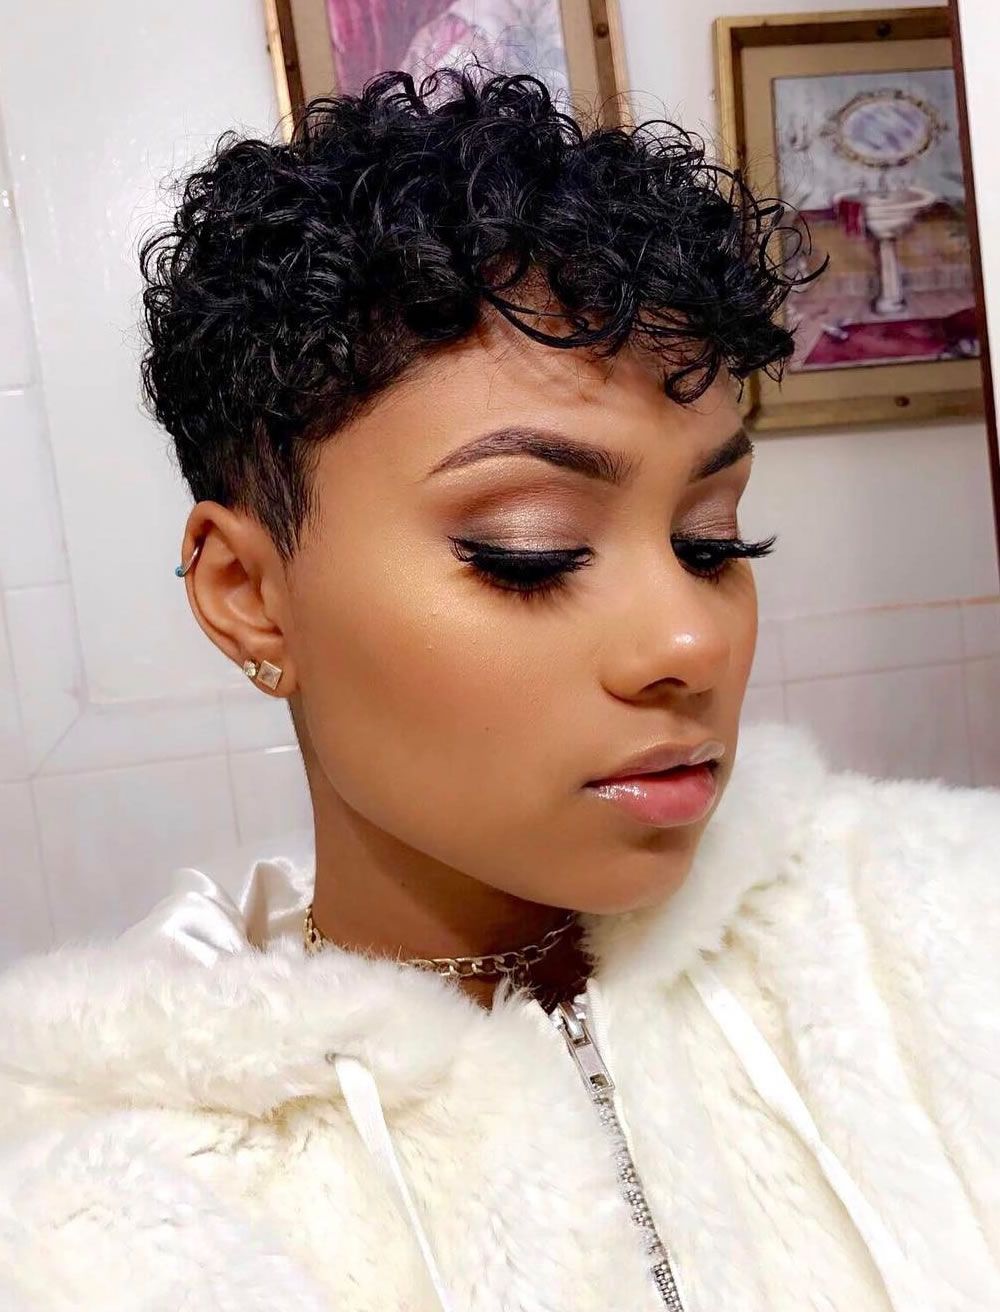 Curly Natural Short Hair Hairstyles For Black Women – Hairstyles In Black Women Natural Short Haircuts (View 7 of 25)